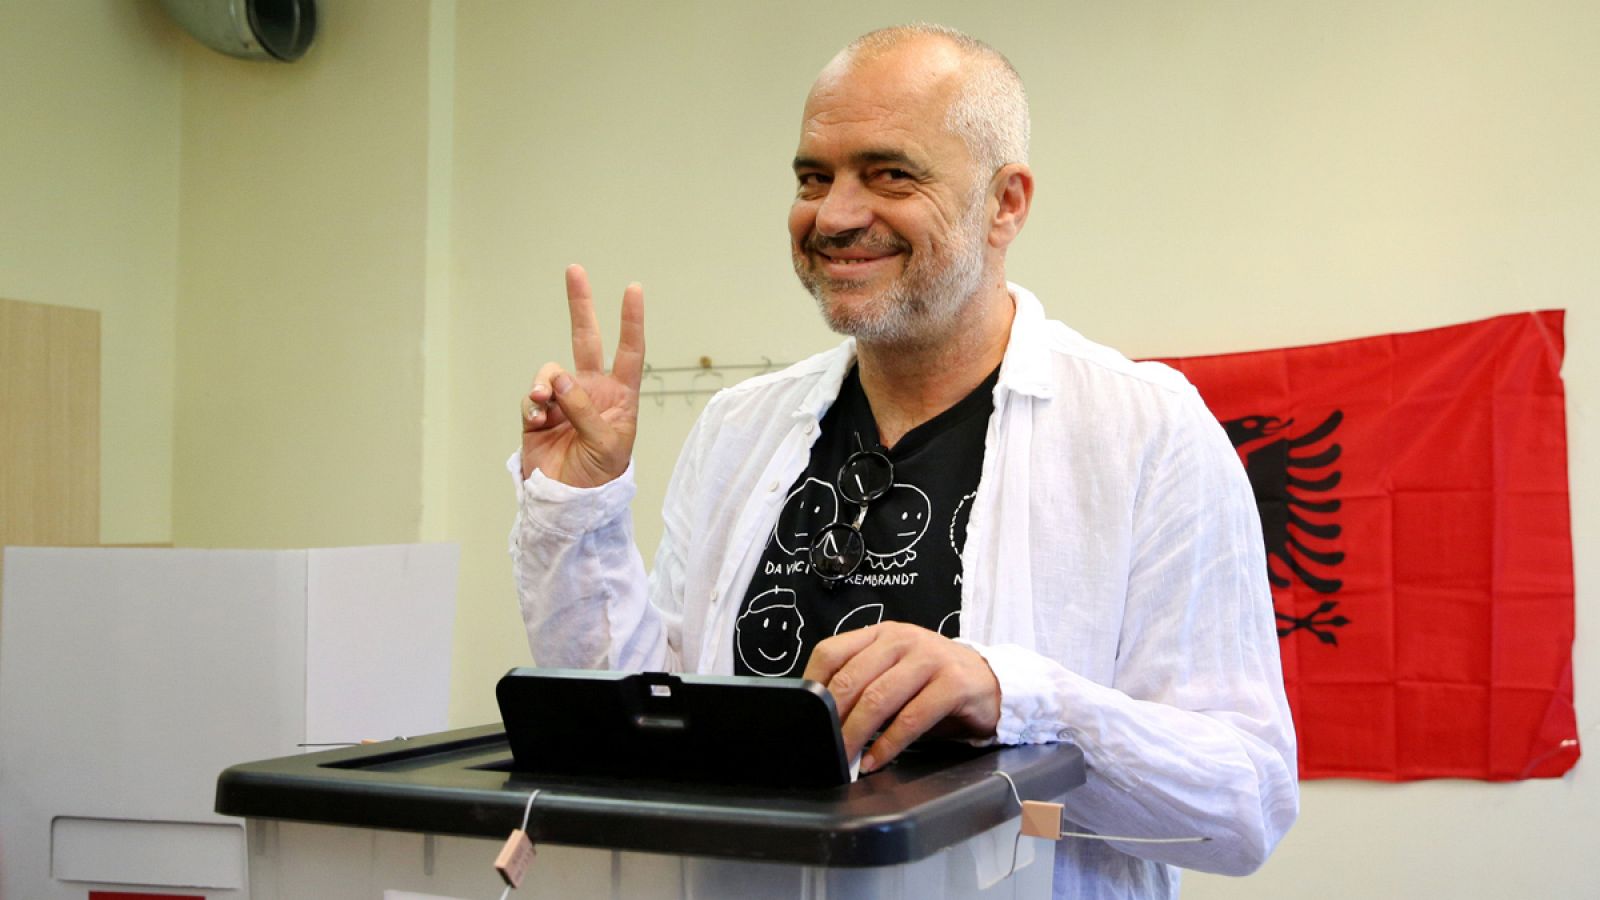 Albanian Socialist Party leader Edi Rama casts his vote during the parliamentary elections in Tirana